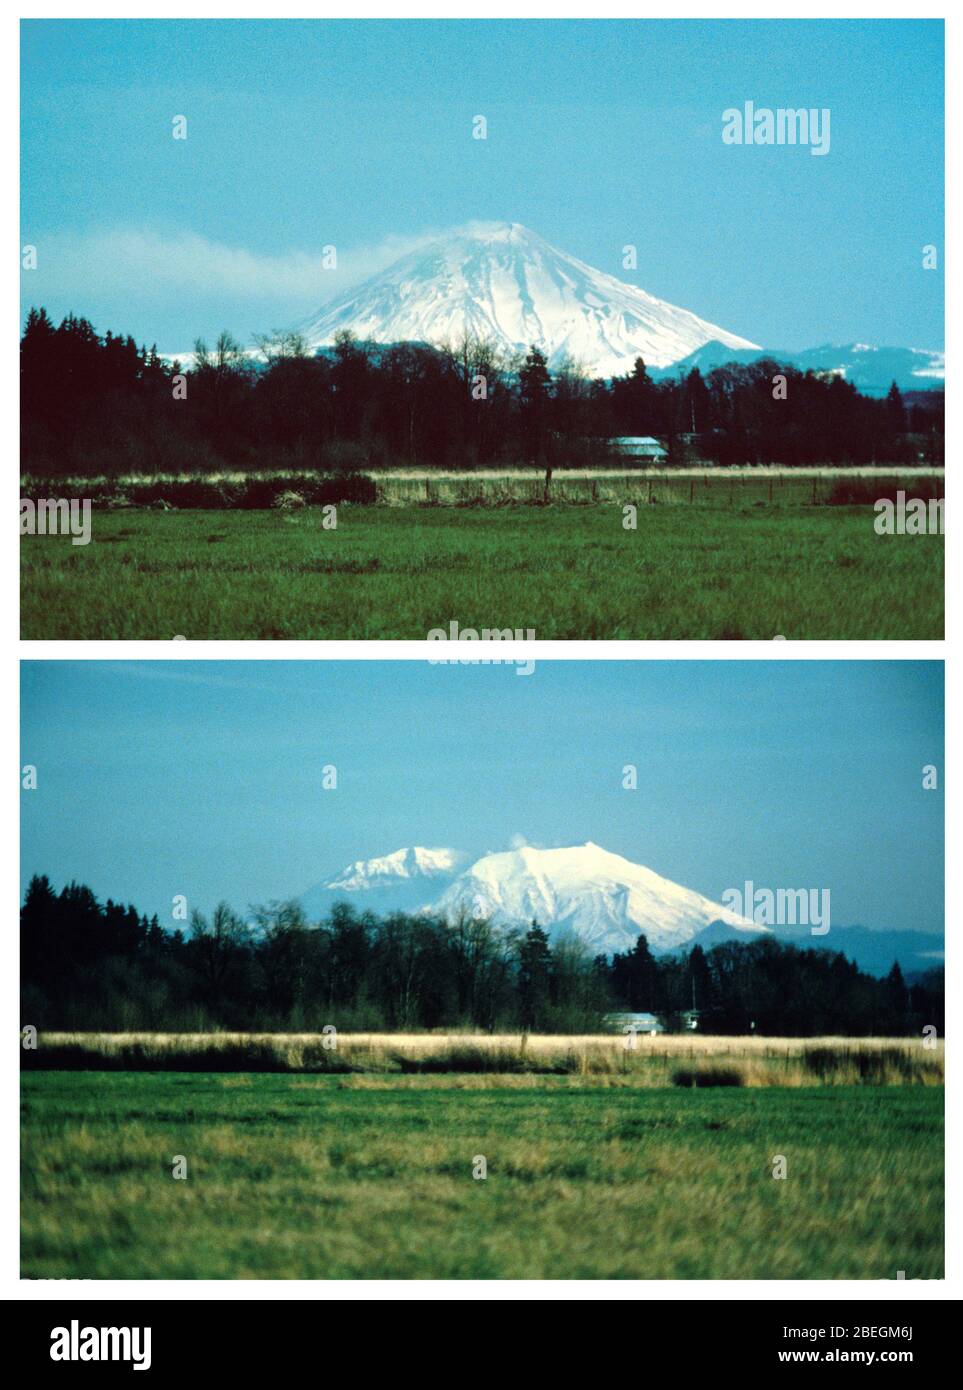 Mount St. Helens Before and After 1980 Eruption Stock Photo